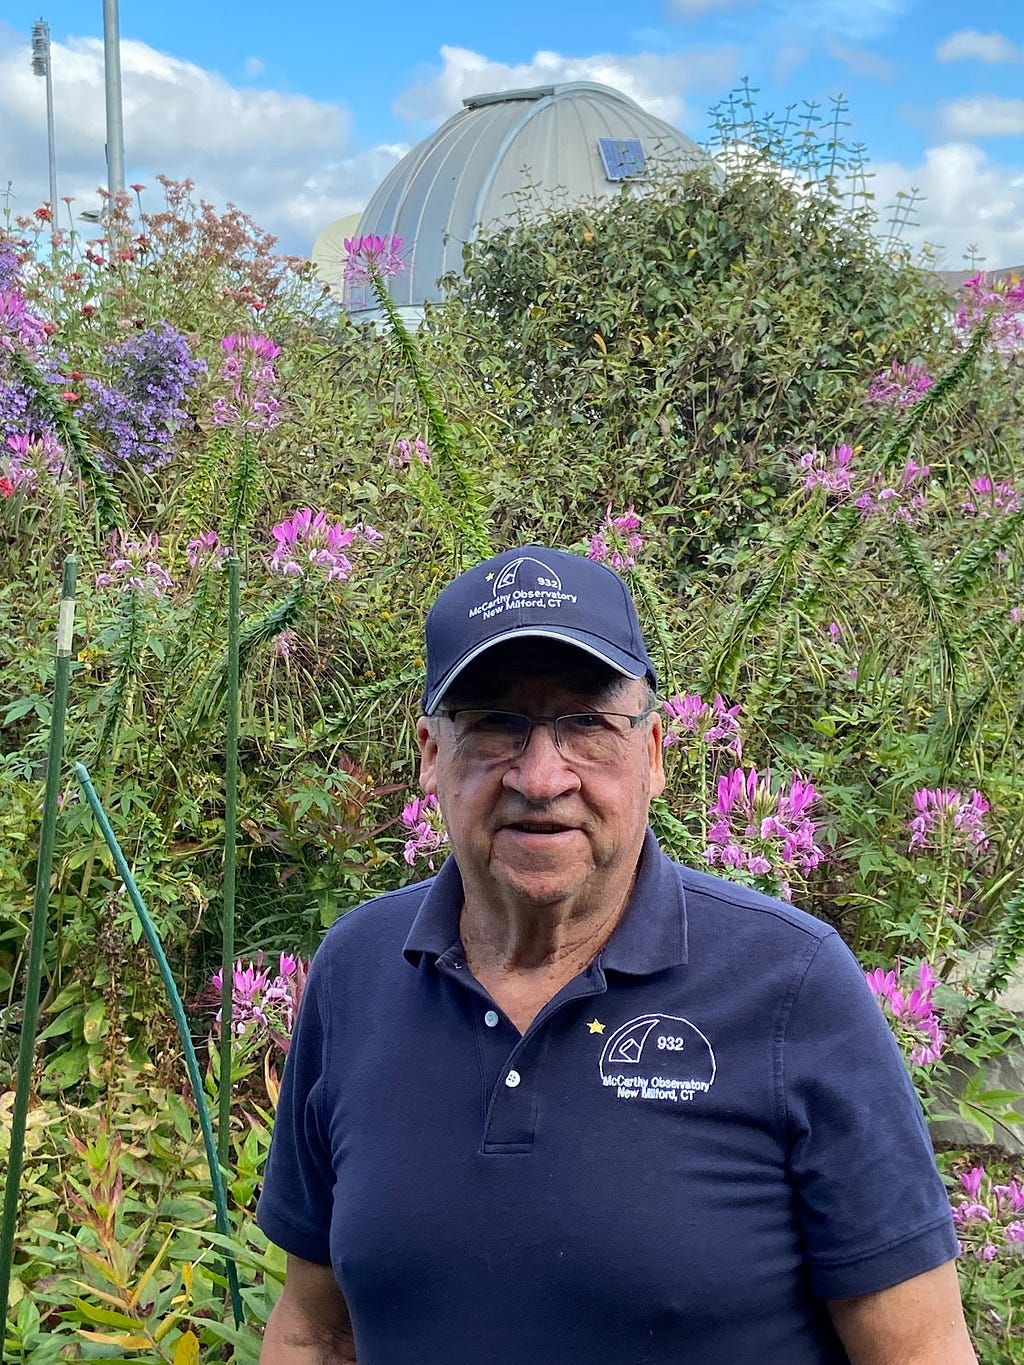 Bob Lambert, an older gentleman, wears a blue baseball cap and blue polo shirt, and stands in front of native flowers at the observatory.